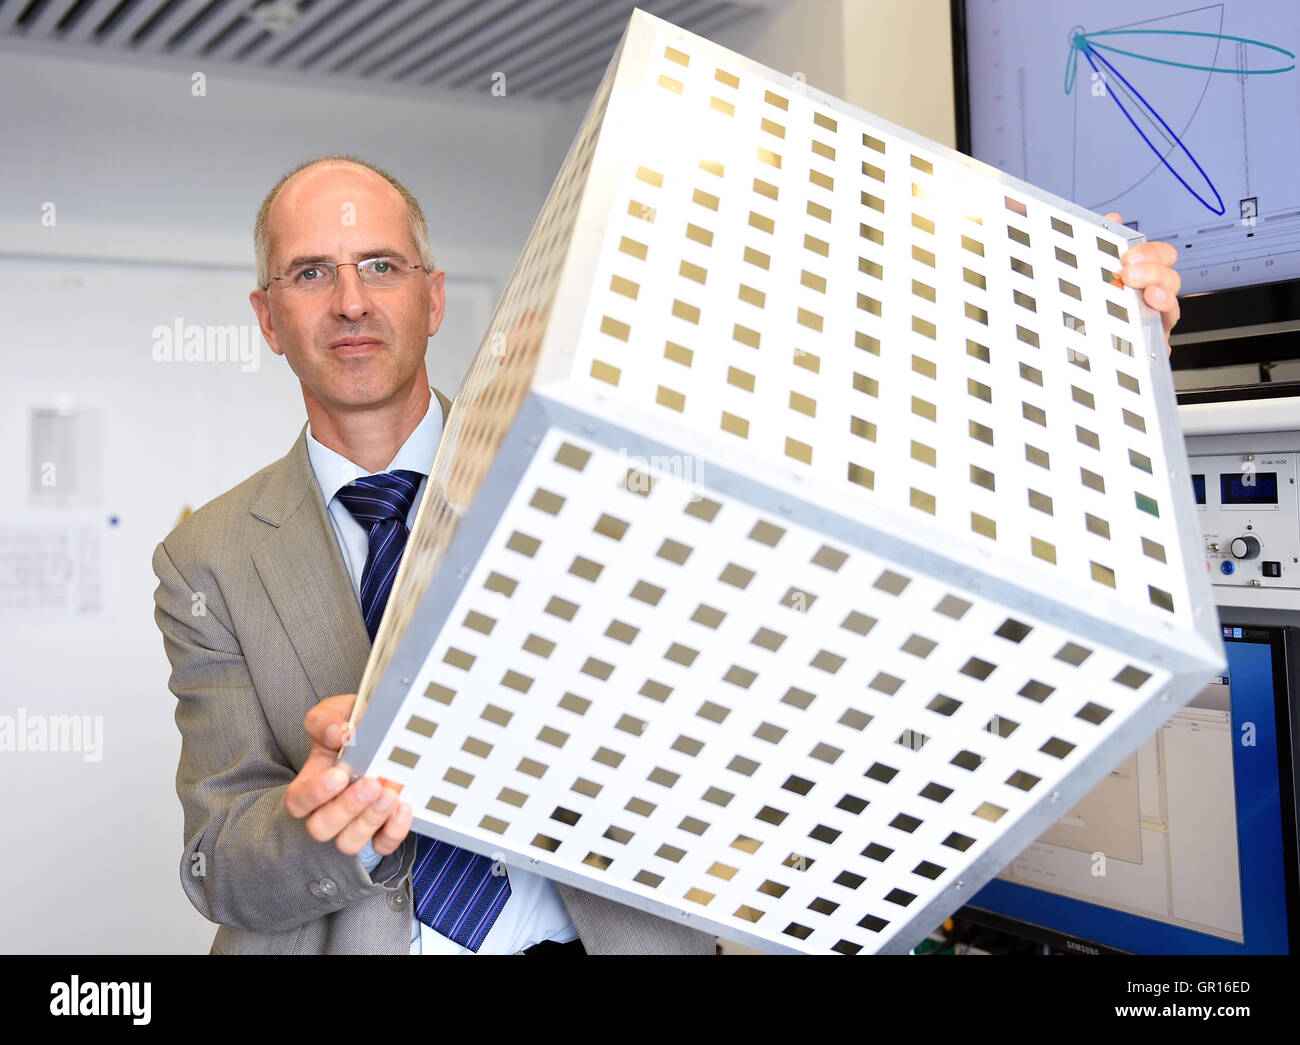 Berlin, Germany. 5th Sep, 2016. Thomas Haustein, a researcher at the Fraunhofer Heinrich-Hertz-Institut, holds up the '5G-Radio-Massive MIMO' antenna technology, with regard to research on the 5G mobile communication standard, at the Fraunhofer Heinrich-Hertz-Institut in Berlin, Germany, 5 September 2016. Berlin is to be the location for the development of the 5G network. PHOTO: BRITTA PEDERSEN/DPA/Alamy Live News Stock Photo